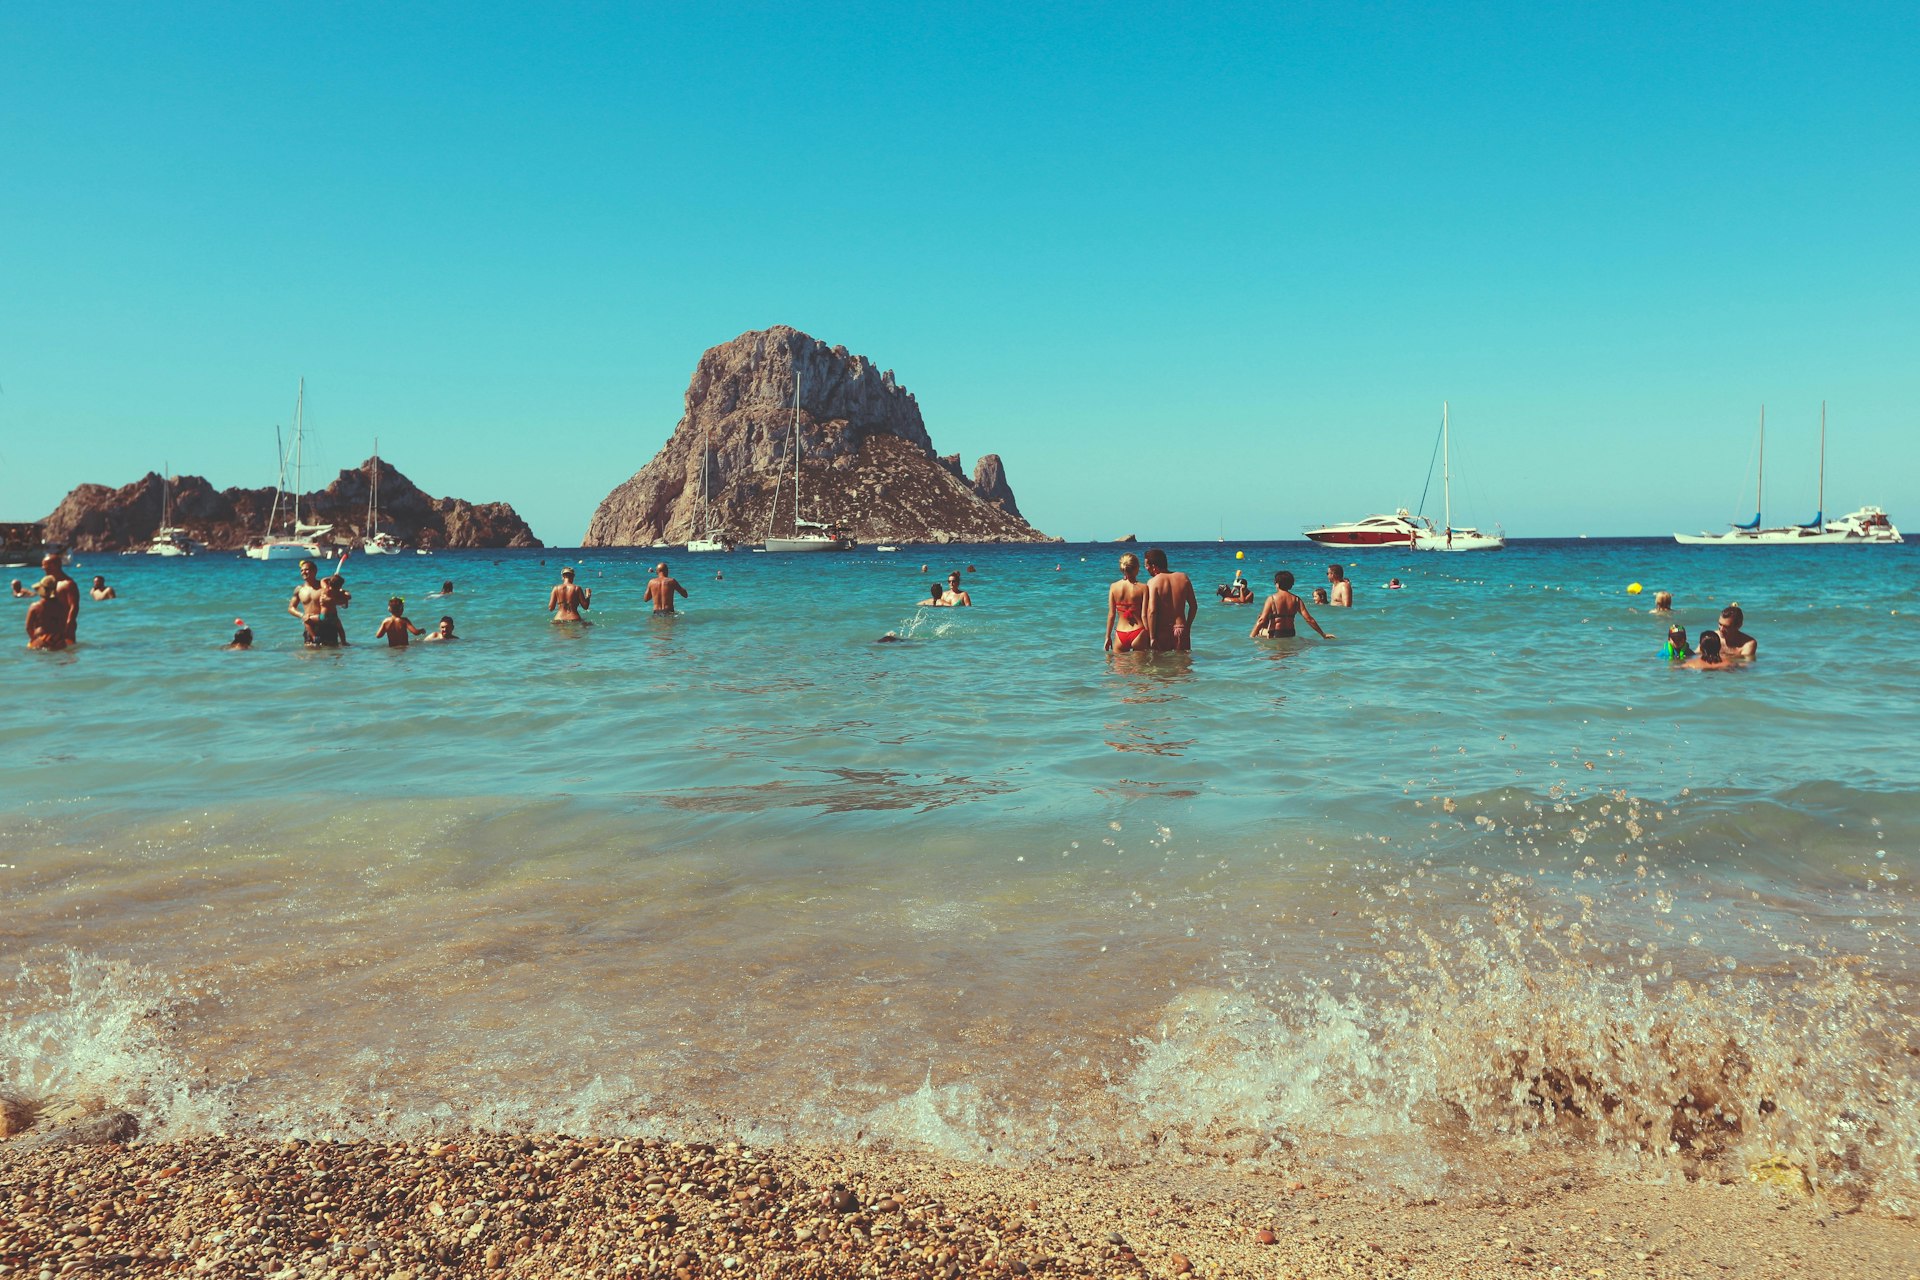 Swimmers in the water at Cala d’Hort beach with Es Vedrà island in the distance, Ibiza, Spain